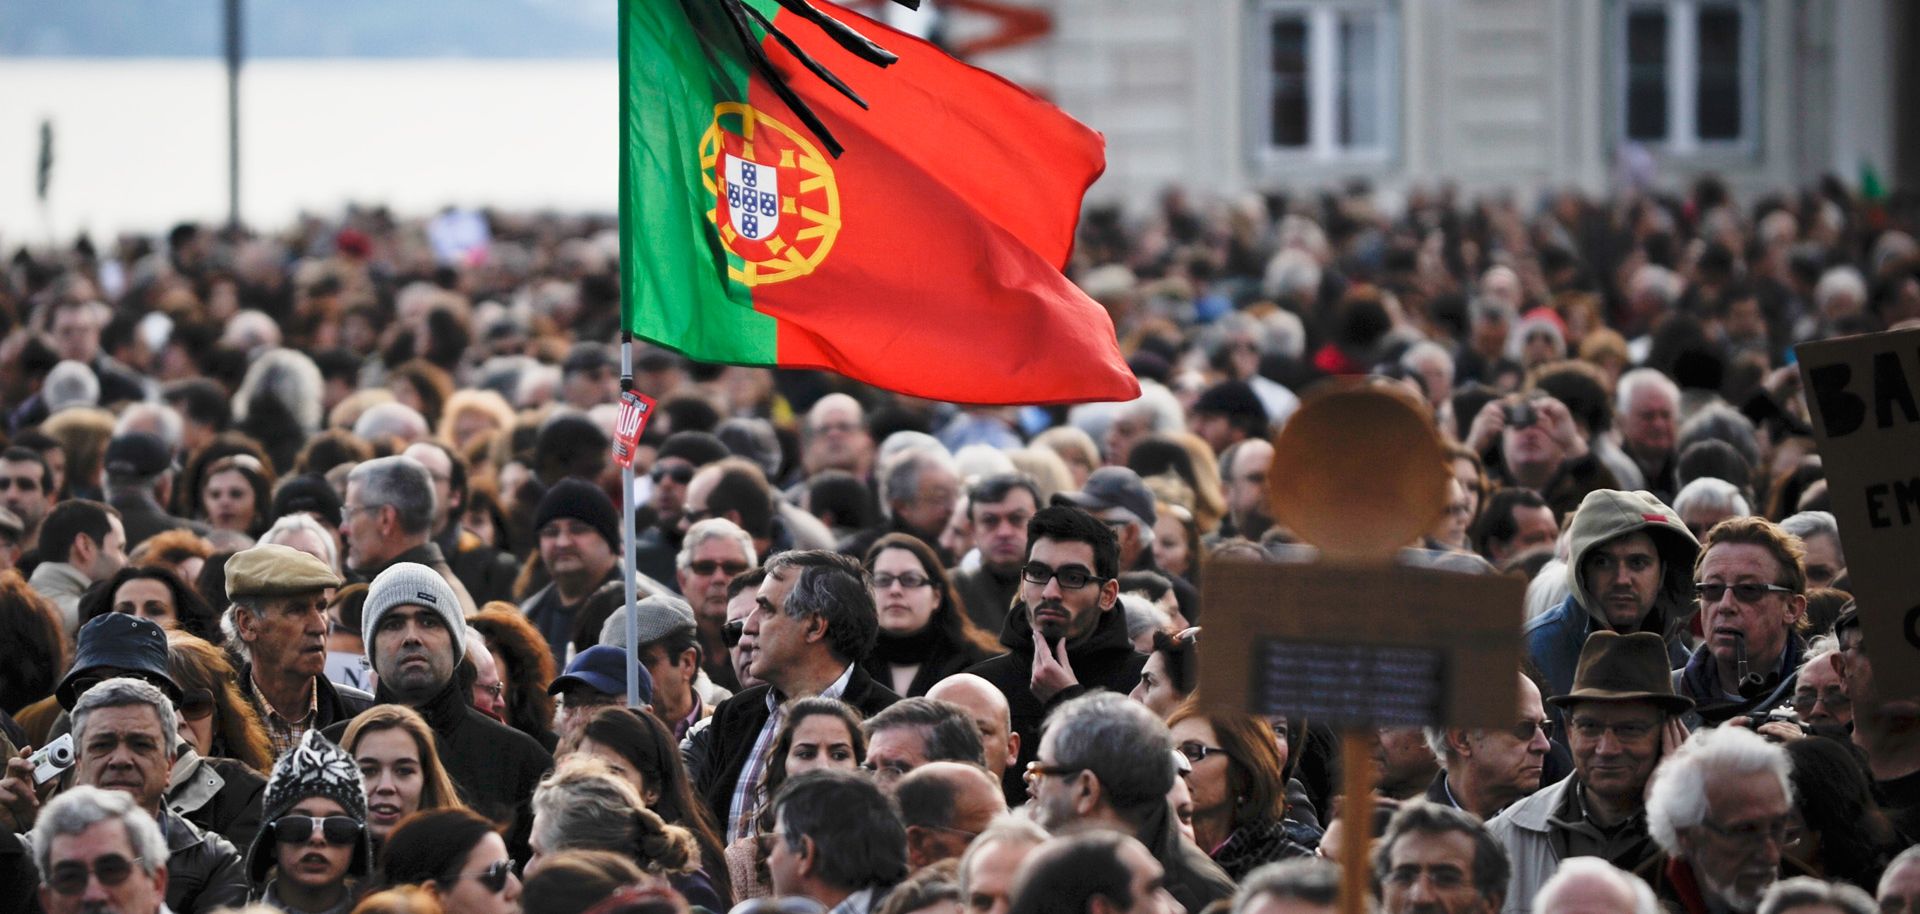 Portugal: Balancing Austerity With Stability